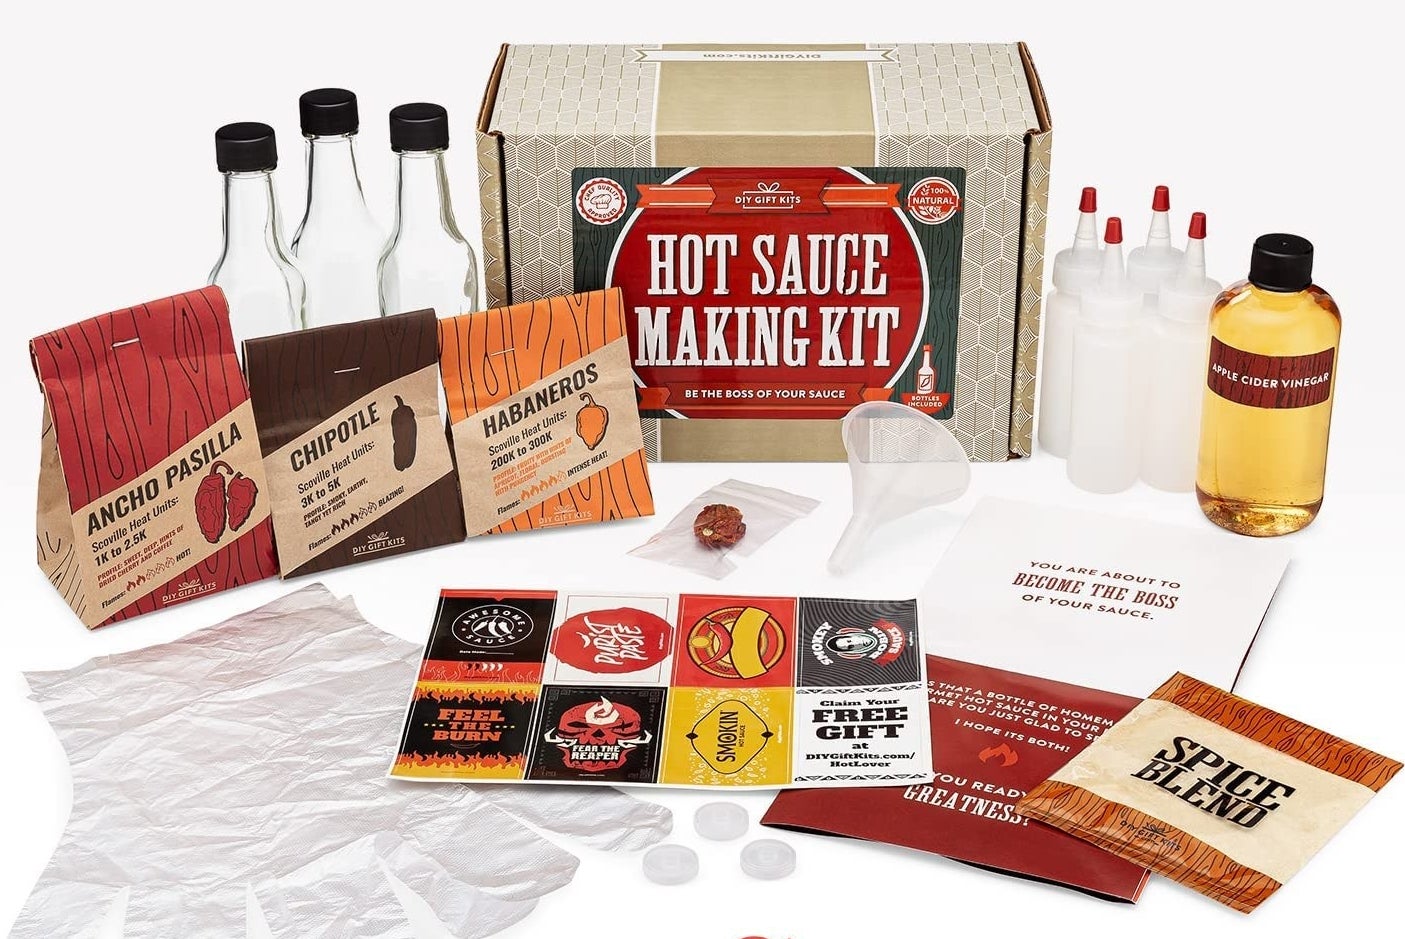 Everything that comes in the hot sauce kit